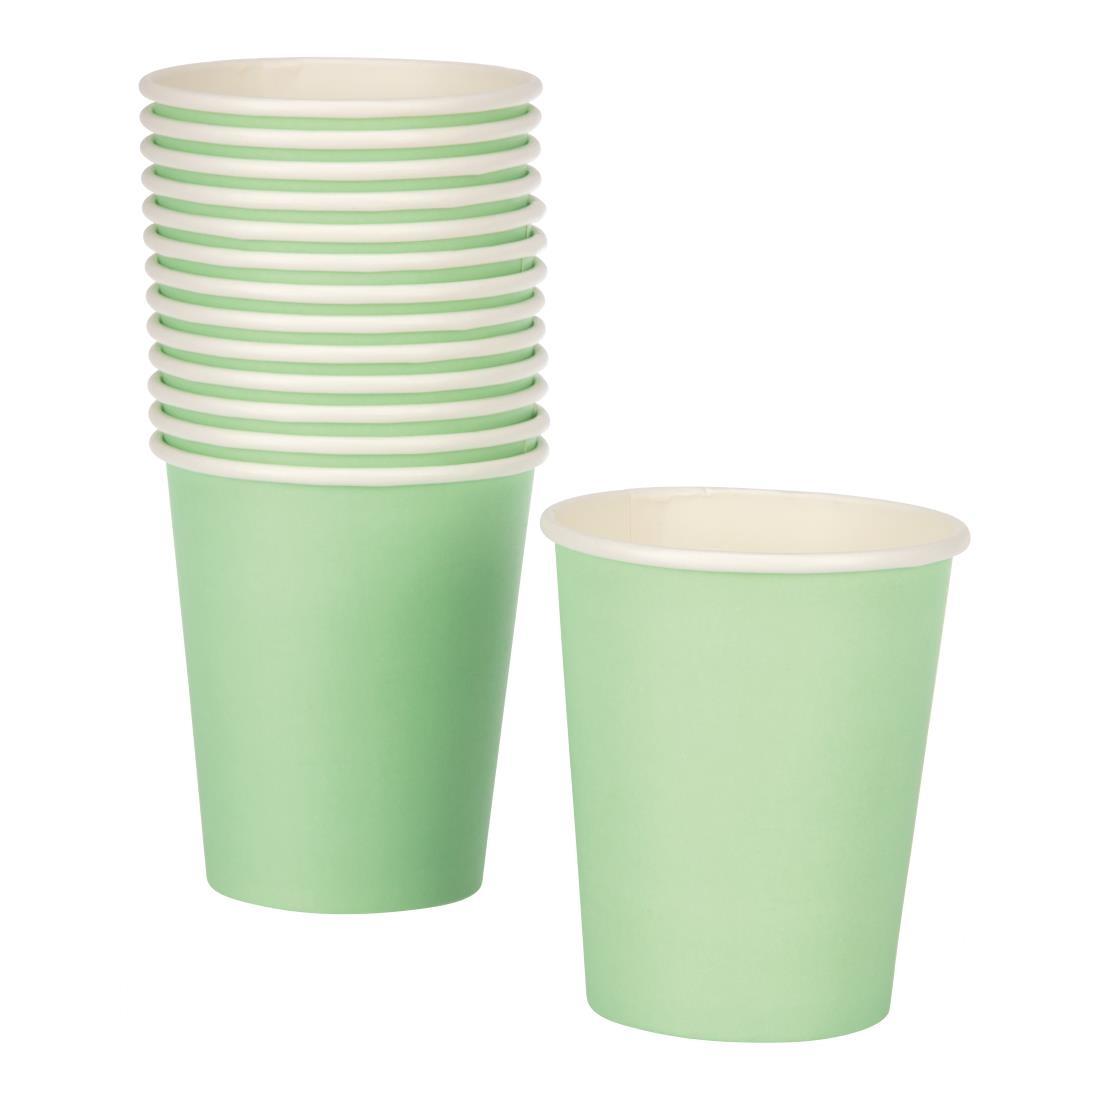 Fiesta Recyclable Coffee Cups Single Wall Turquoise 225ml / 8oz (Pack of 50) - GP400  - 4